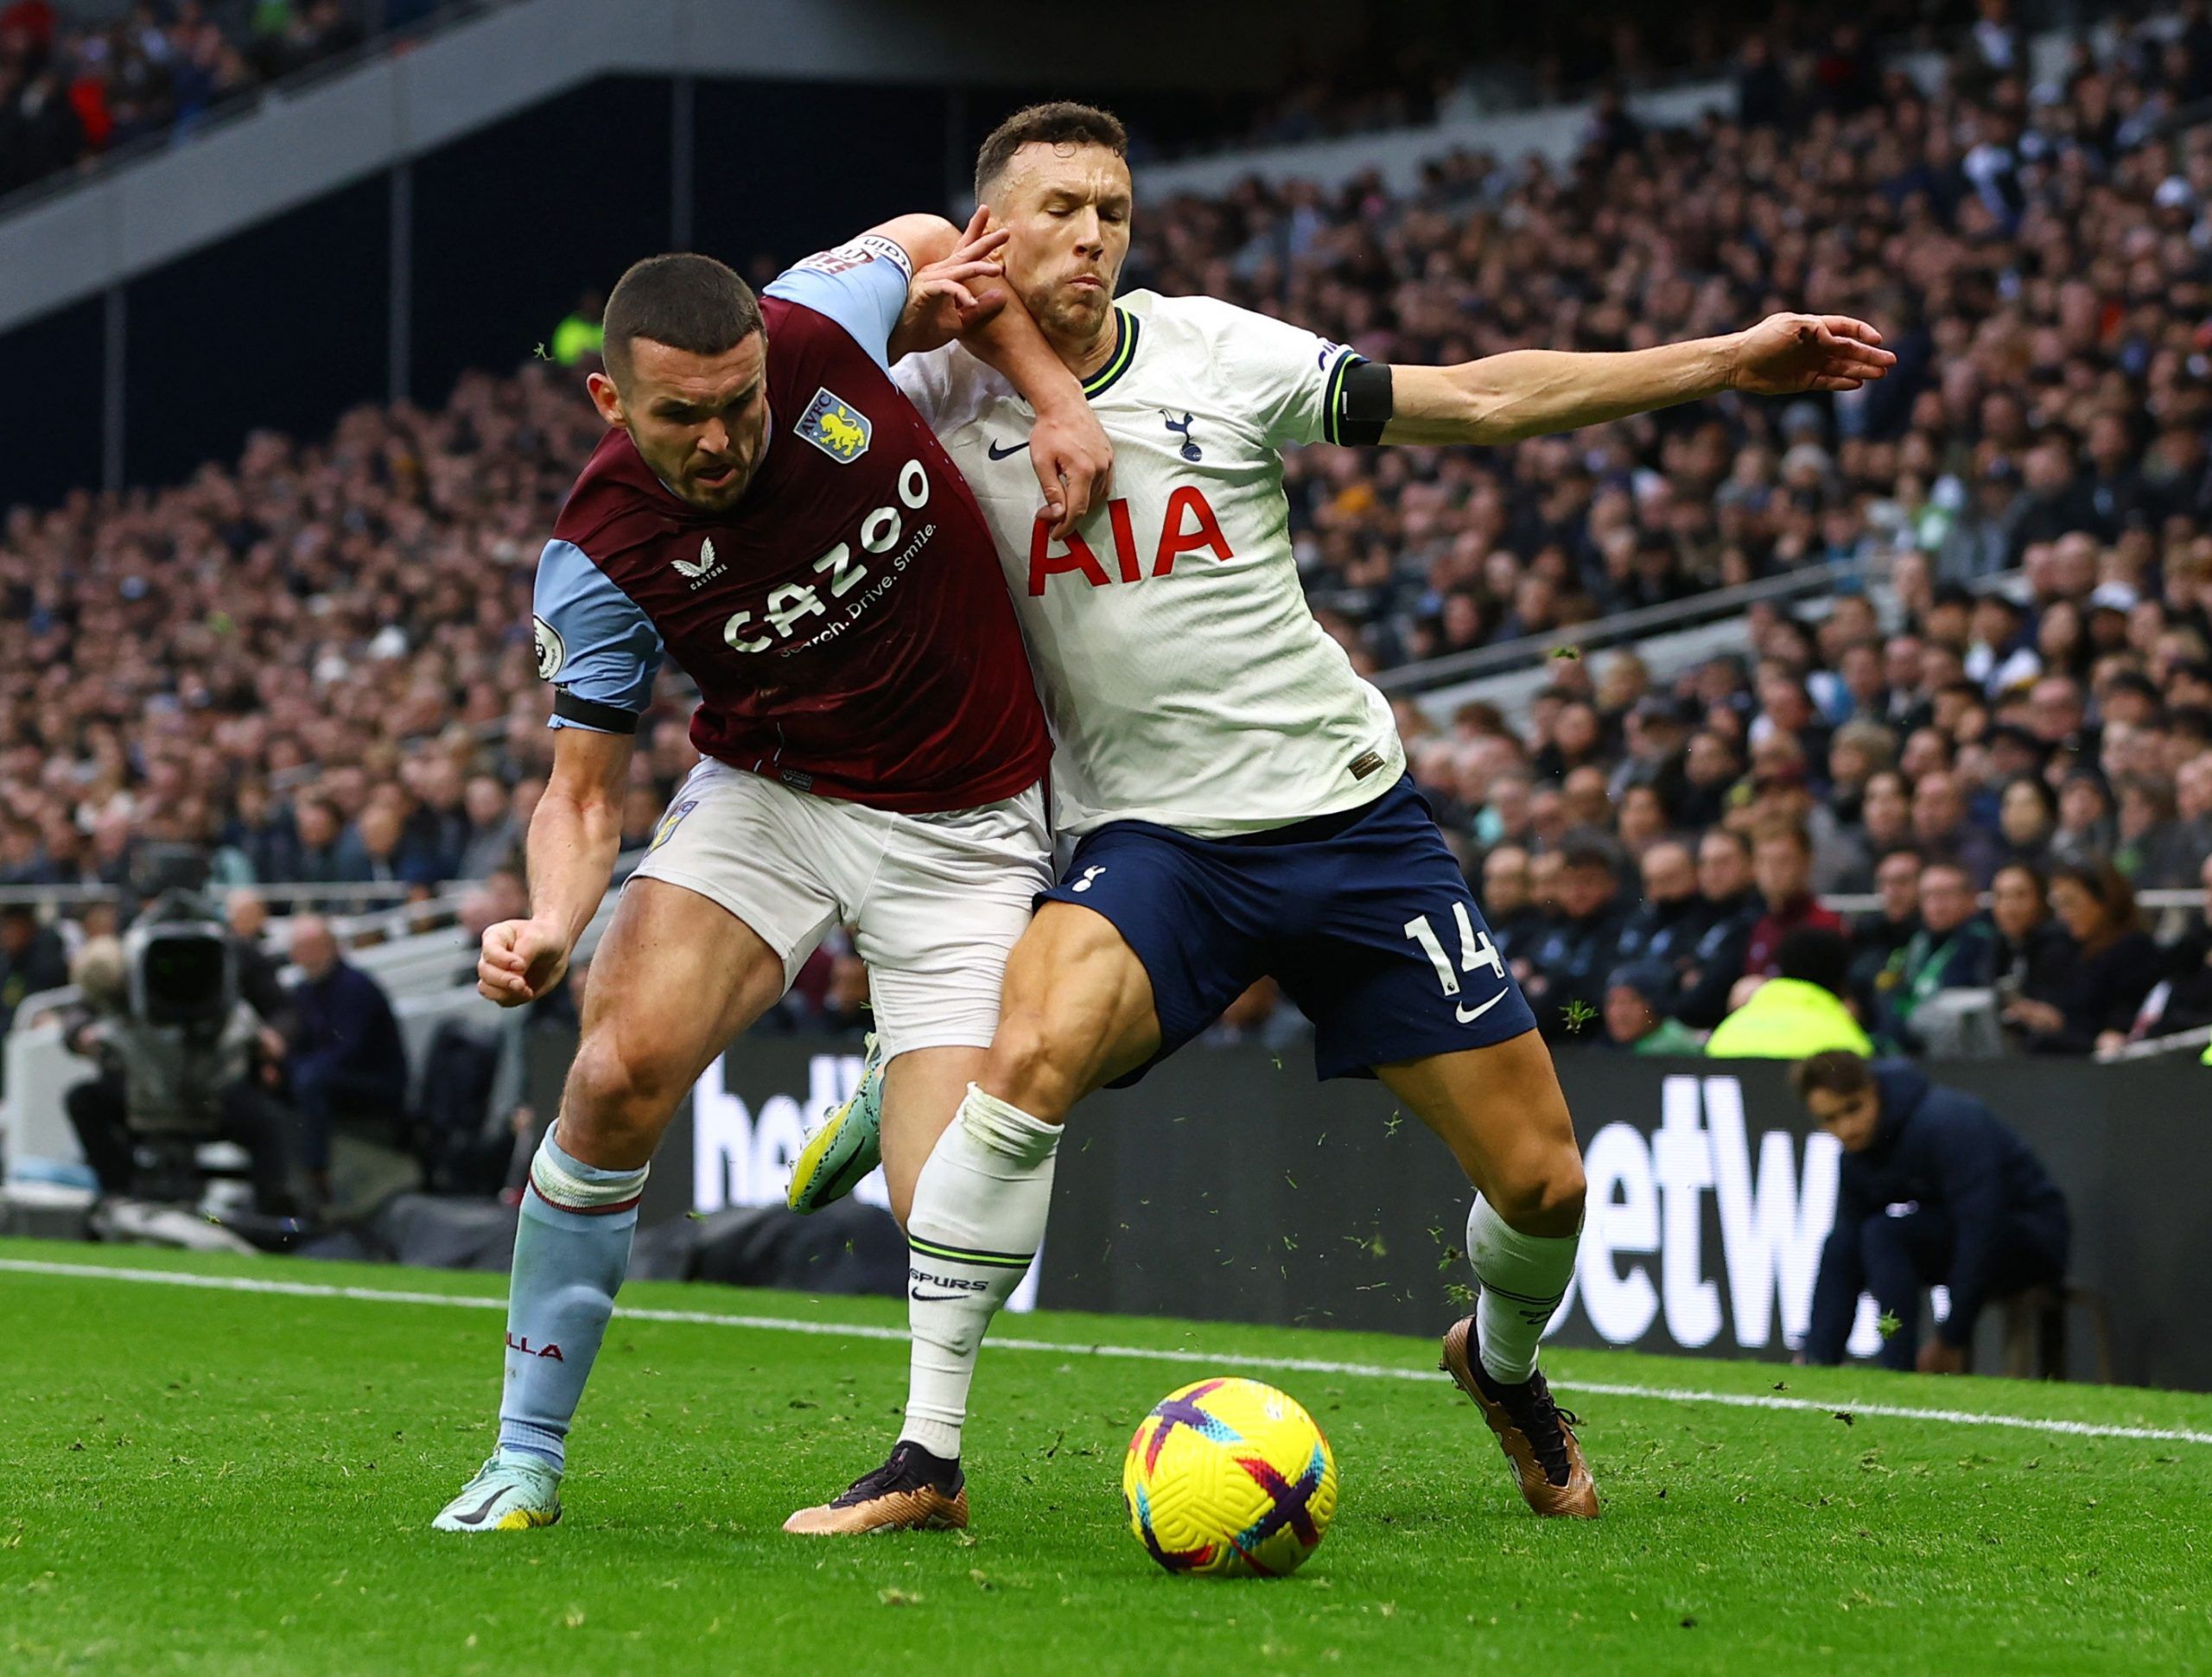 Soccer Football - Premier League - Tottenham Hotspur v Aston Villa - Tottenham Hotspur Stadium, London, Britain - January 1, 2023 Aston Villa's John McGinn in action with Tottenham Hotspur's Ivan Perisic Action Images via Reuters/Paul Childs EDITORIAL USE ONLY. No use with unauthorized audio, video, data, fixture lists, club/league logos or 'live' services. Online in-match use limited to 75 images, no video emulation. No use in betting, games or single club /league/player publications.  Please c